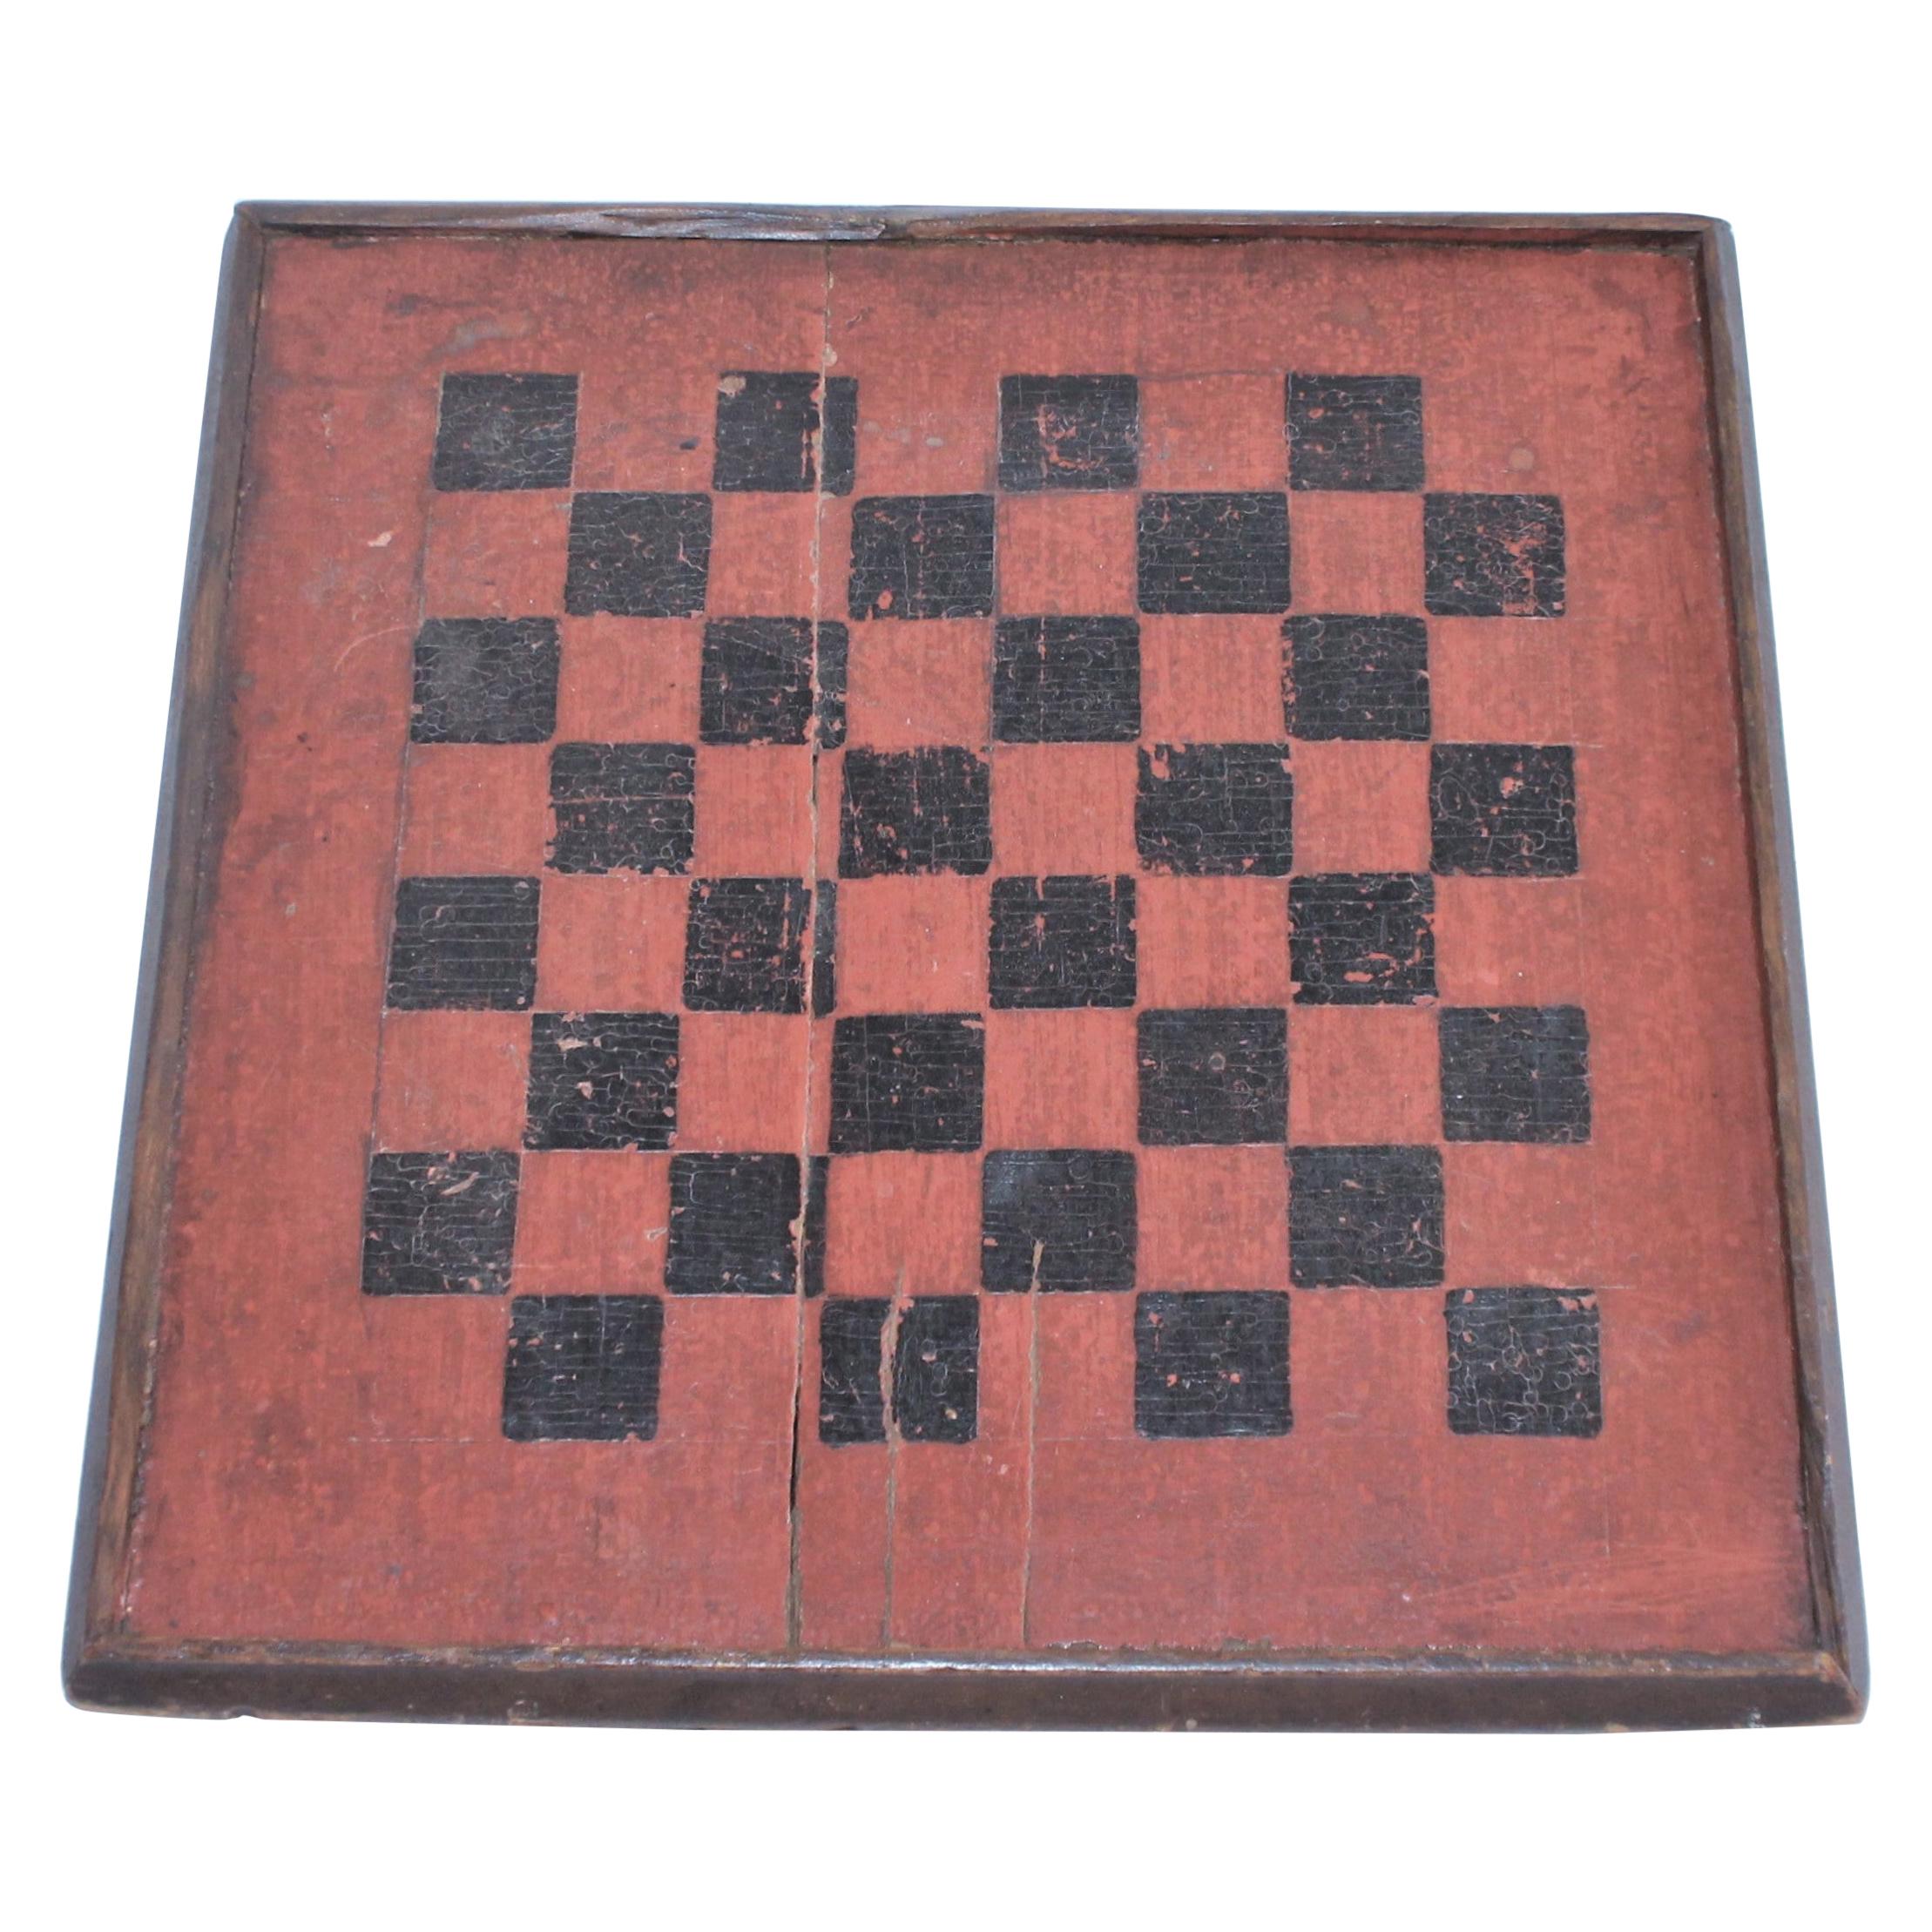 19th Century Game Board in Original Painted Bittersweet and Black Surface